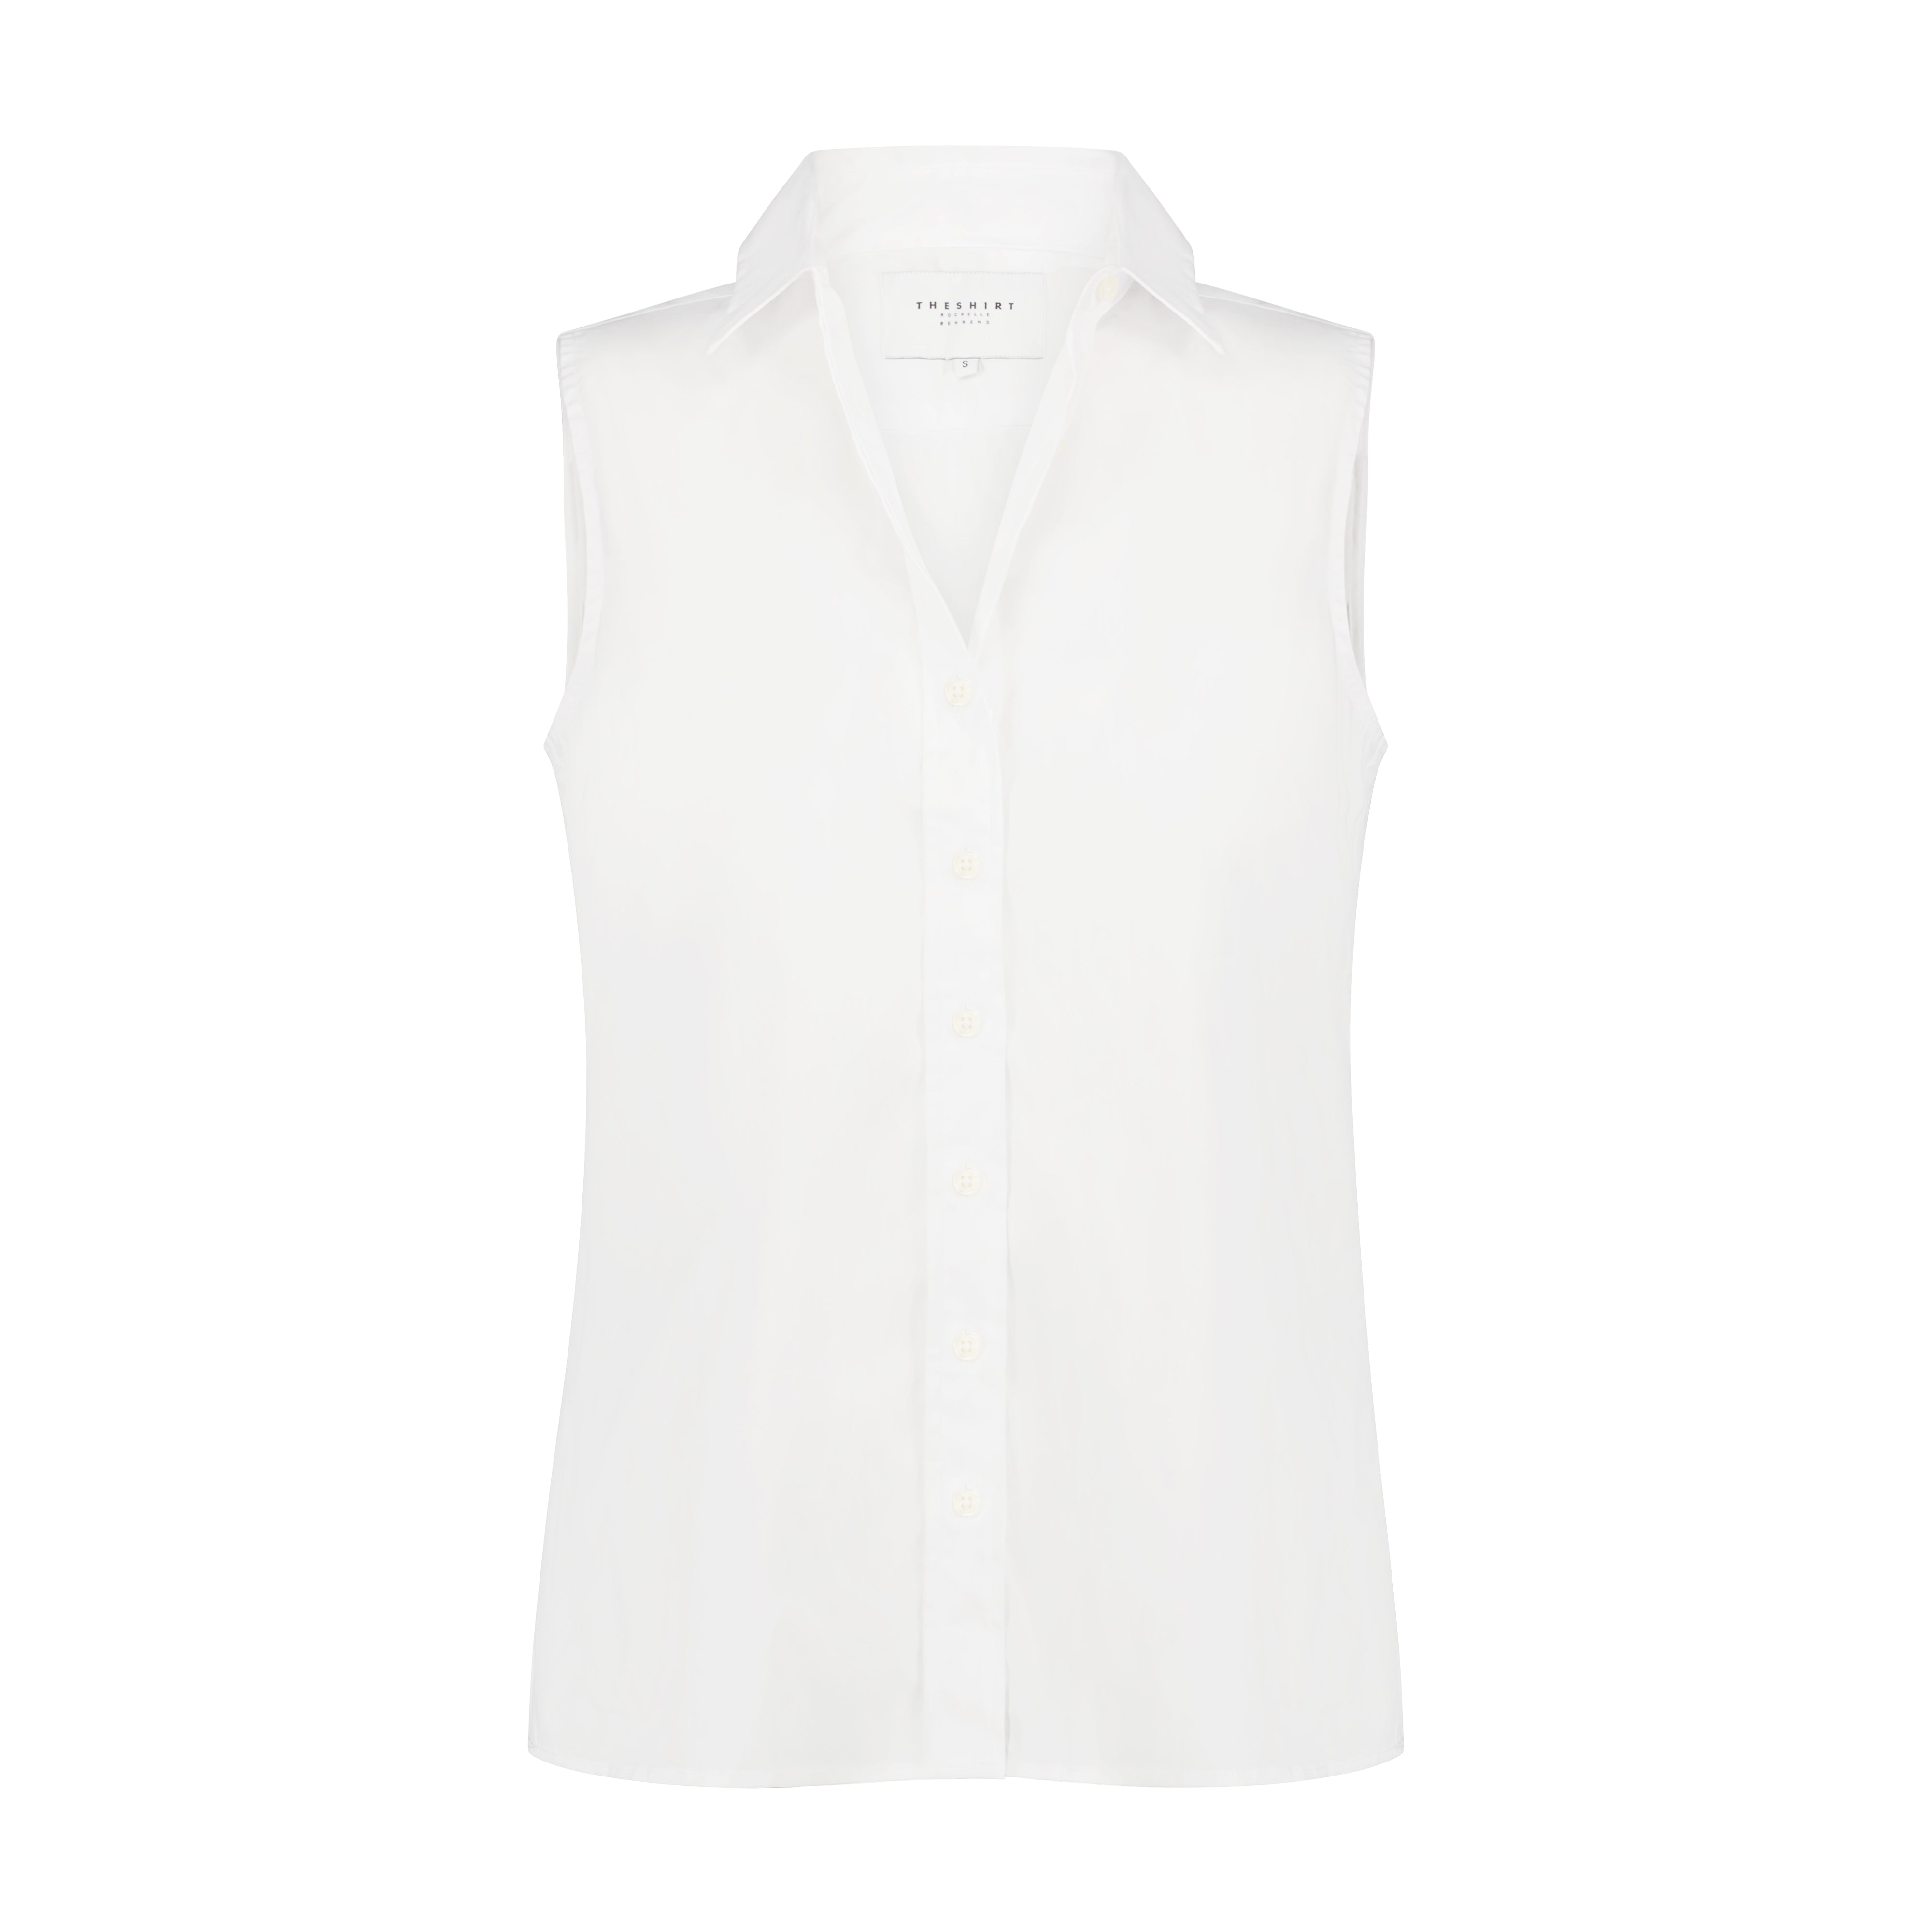 The Shirt by Rochelle Behrens - The Sleeveless Shirt - White